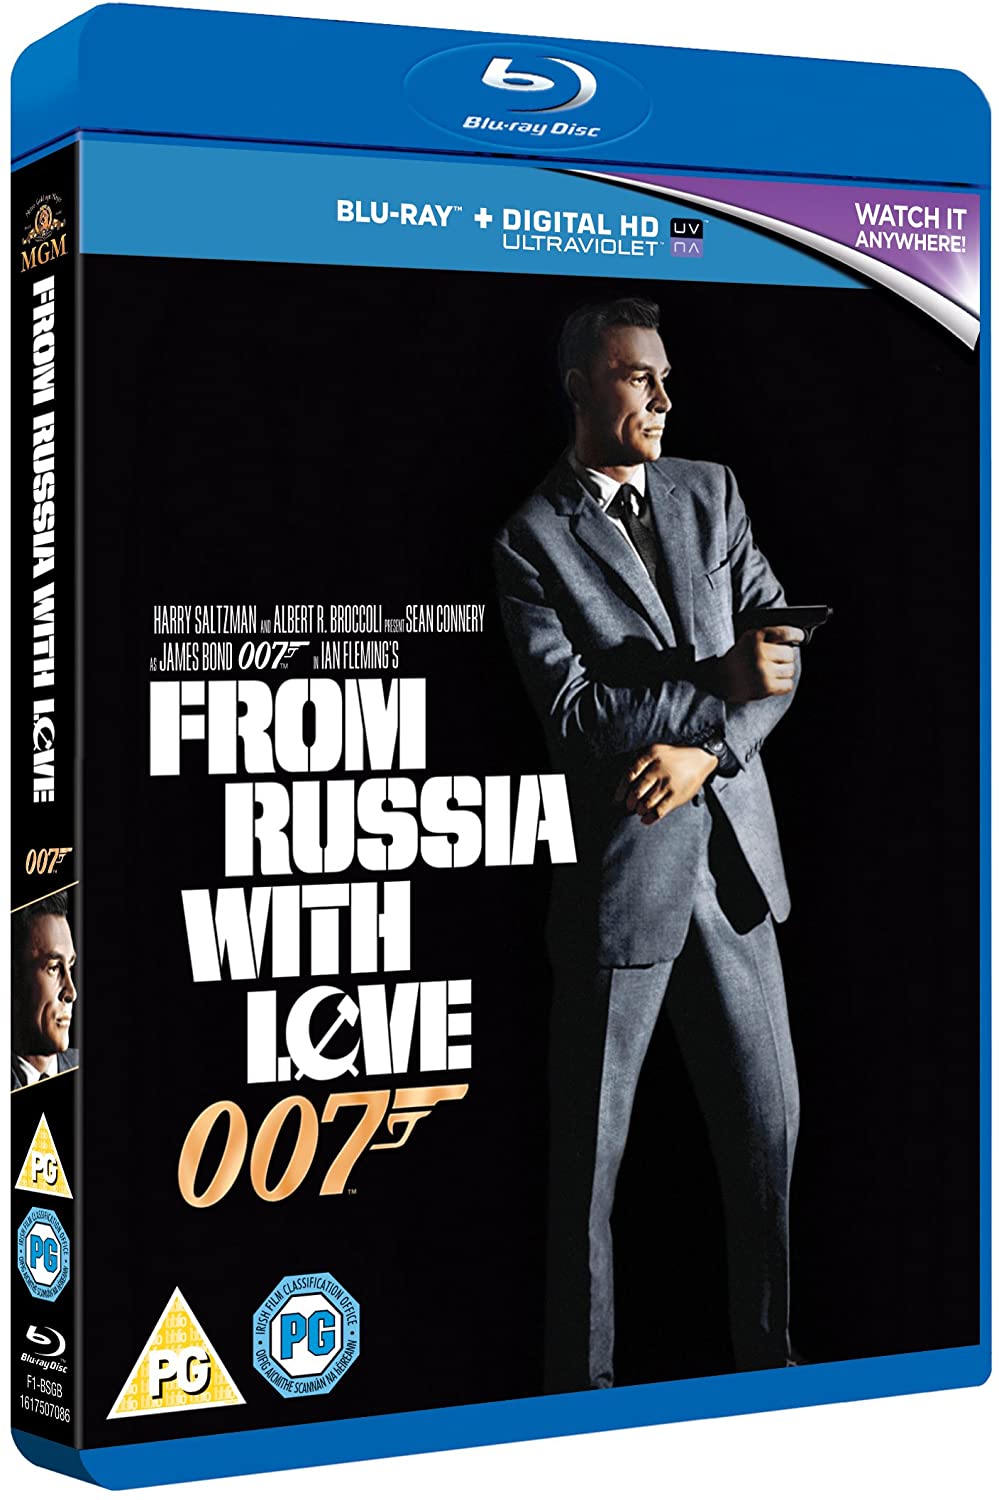 From Russia with Love [1963] – Action/Spionage [Blu-ray]